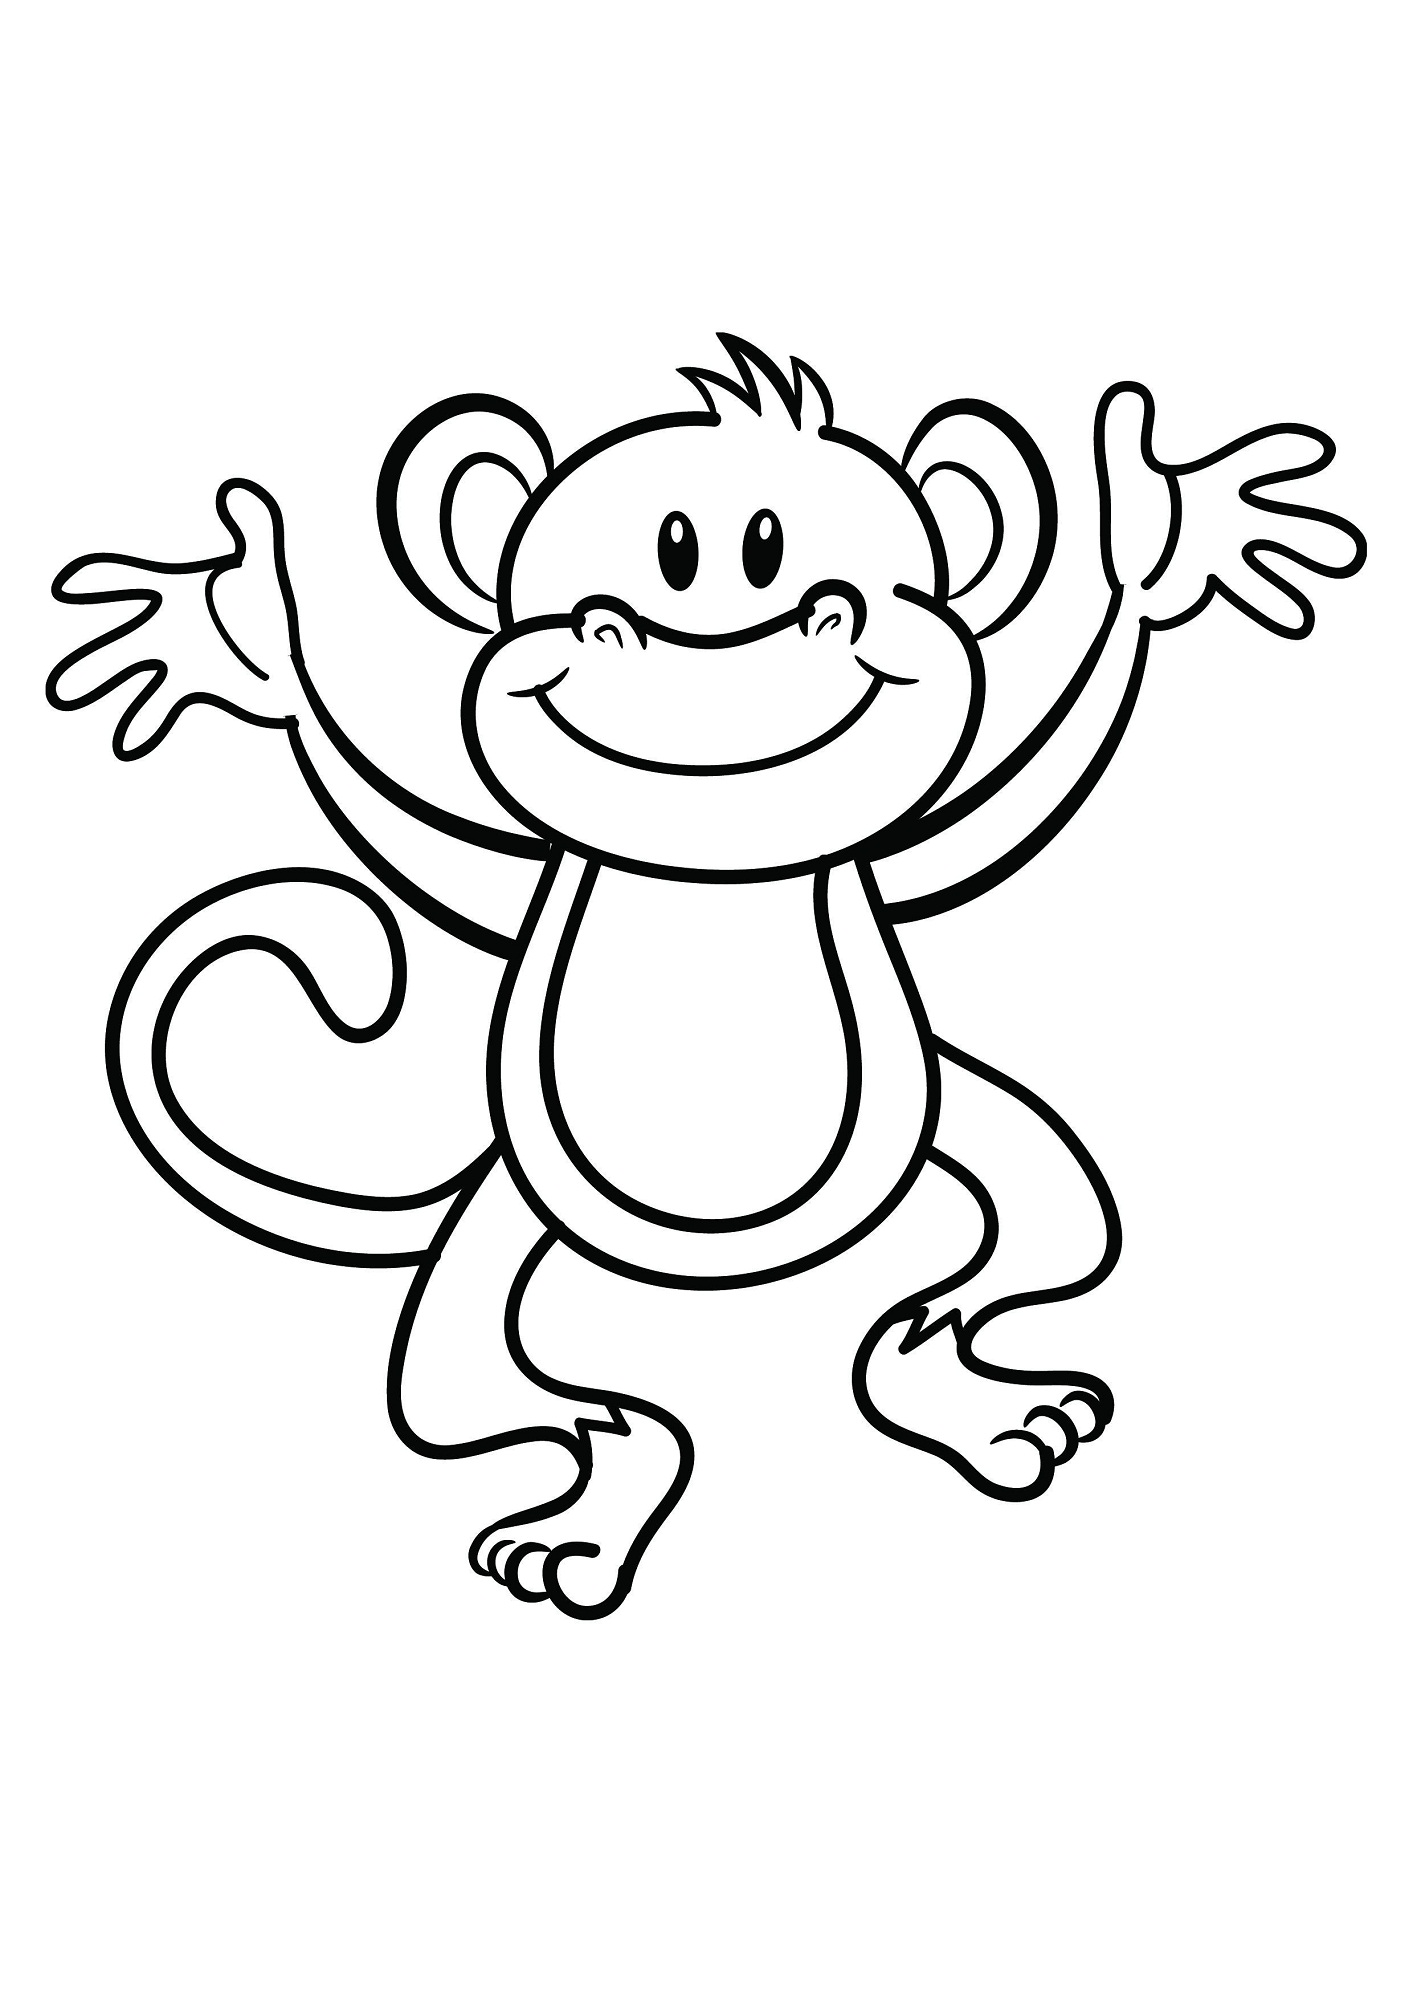 coloring-pages-of-monkeys-printable-activity-shelter